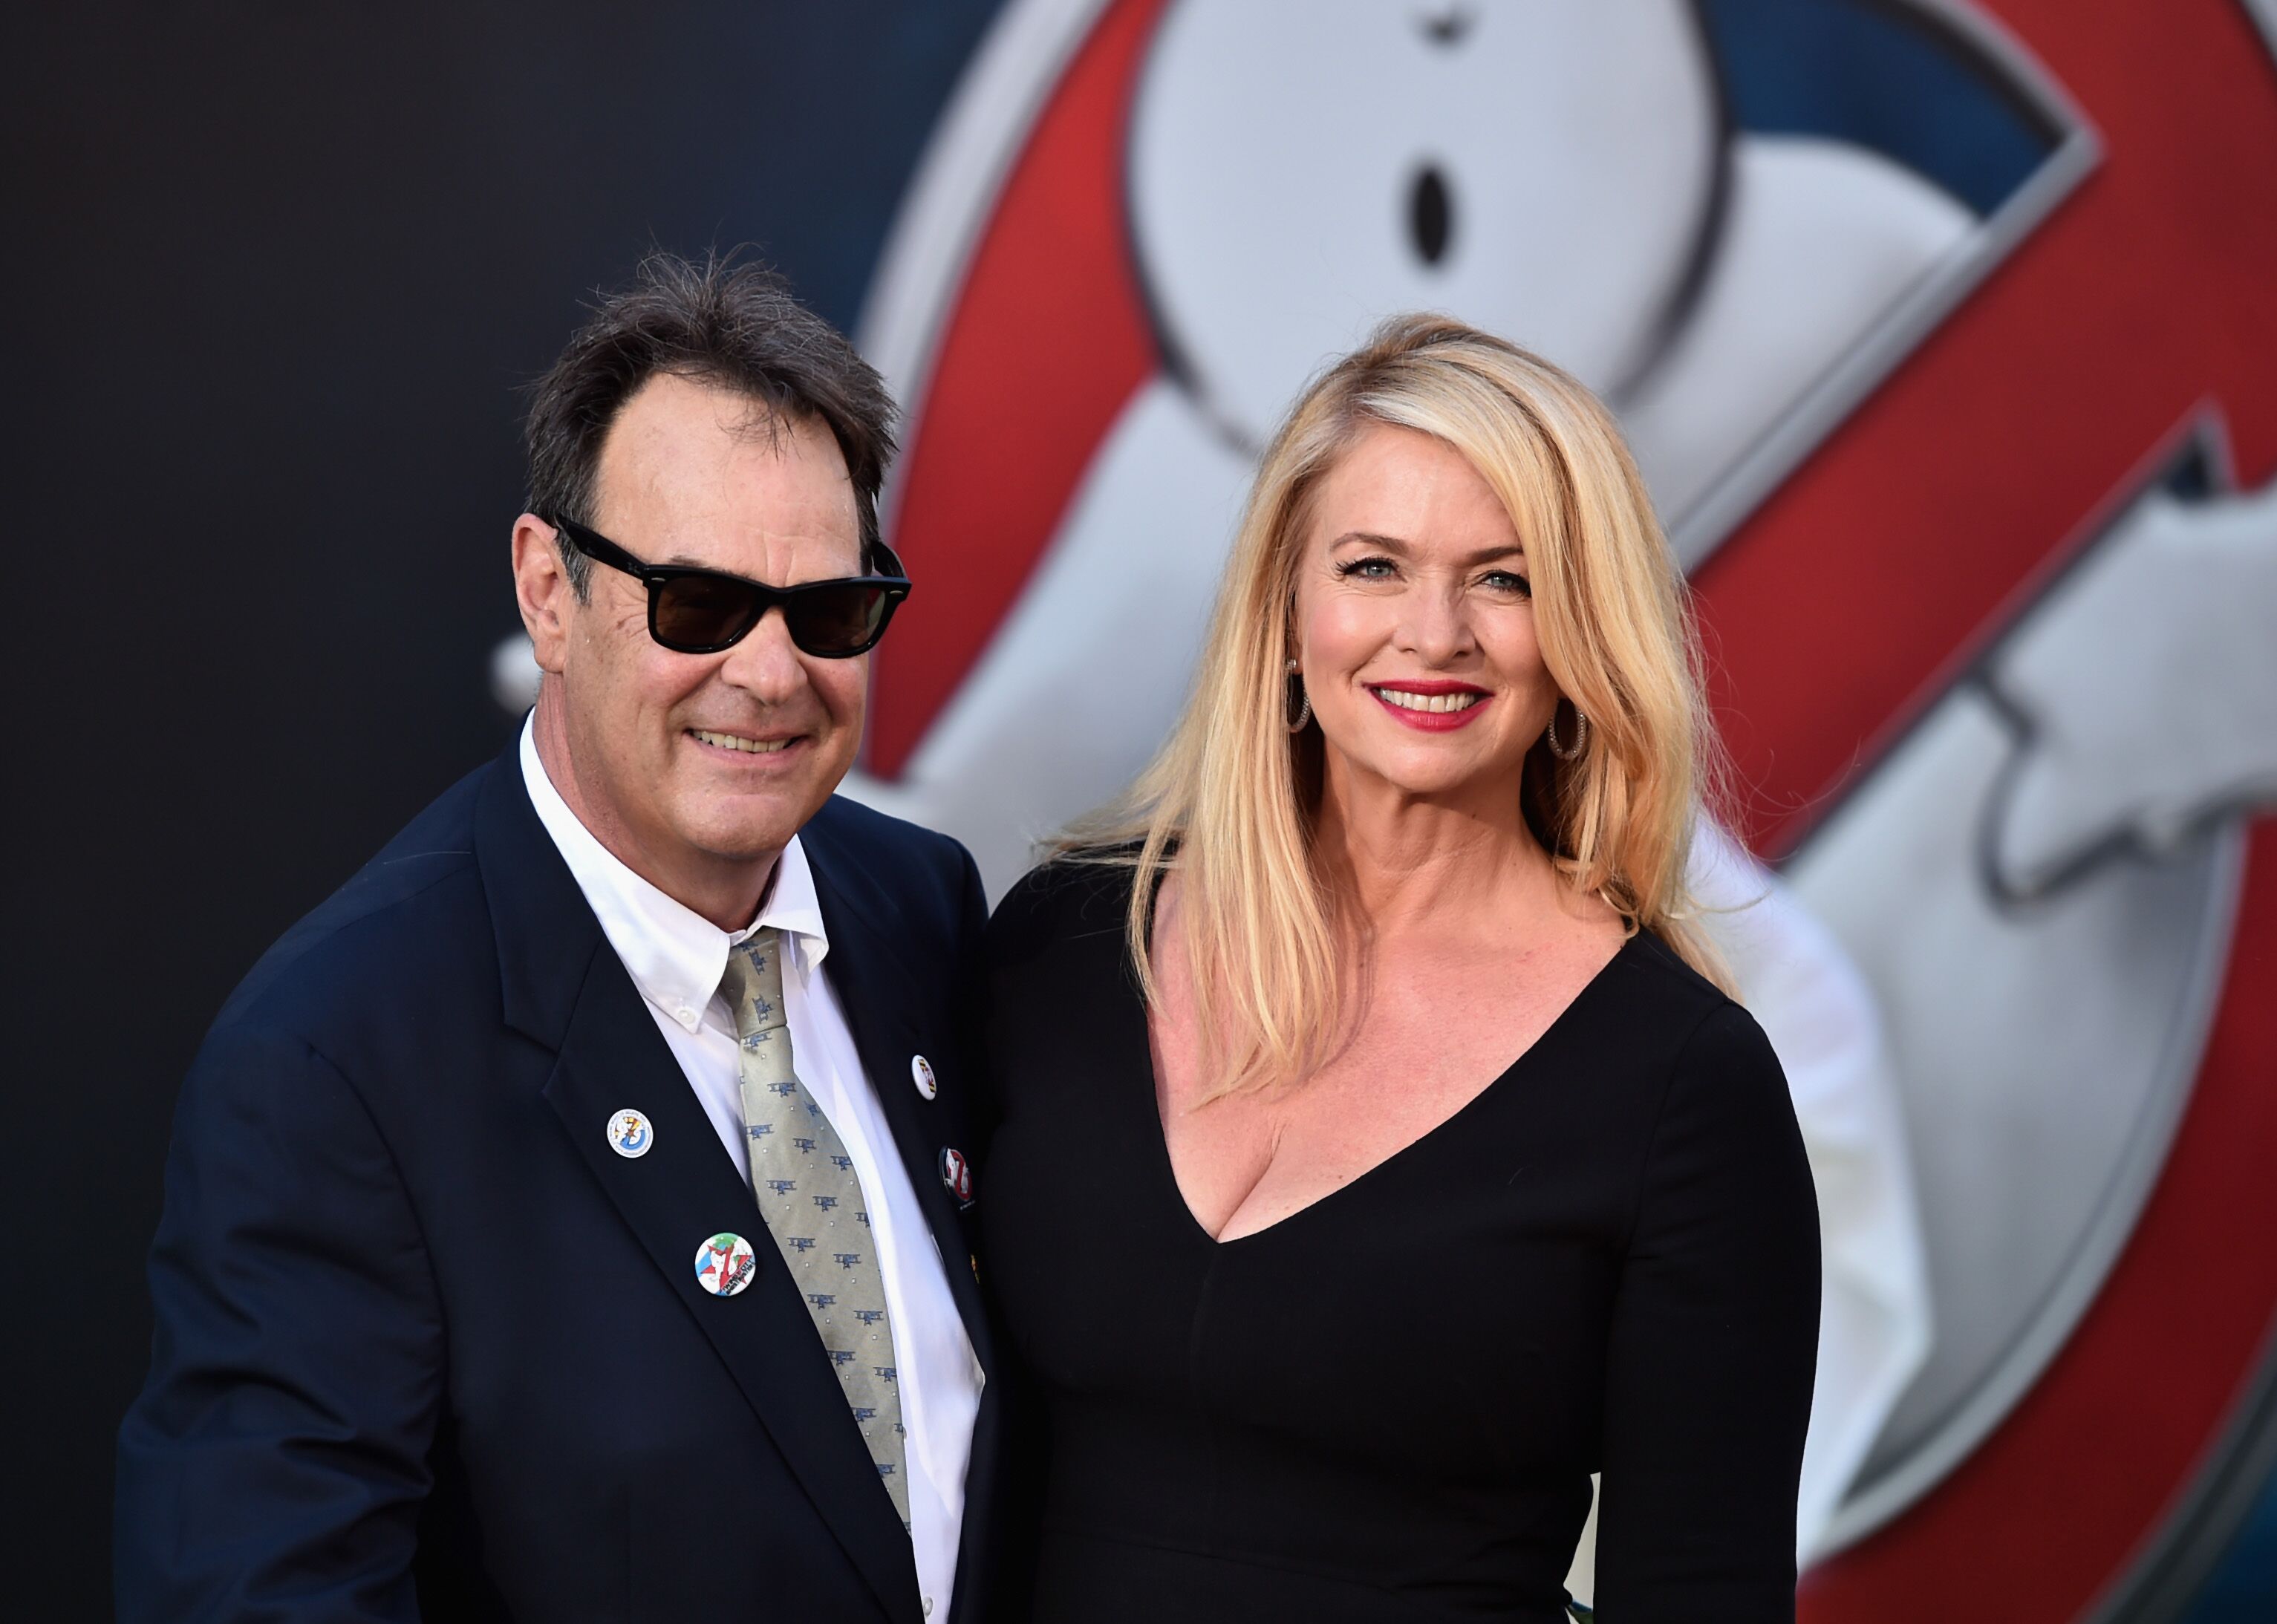  Dan Aykroyd and Donna Dixon arrive at the Premiere of Sony Pictures' 'Ghostbusters' at TCL Chinese Theatre. | Source: Getty Images